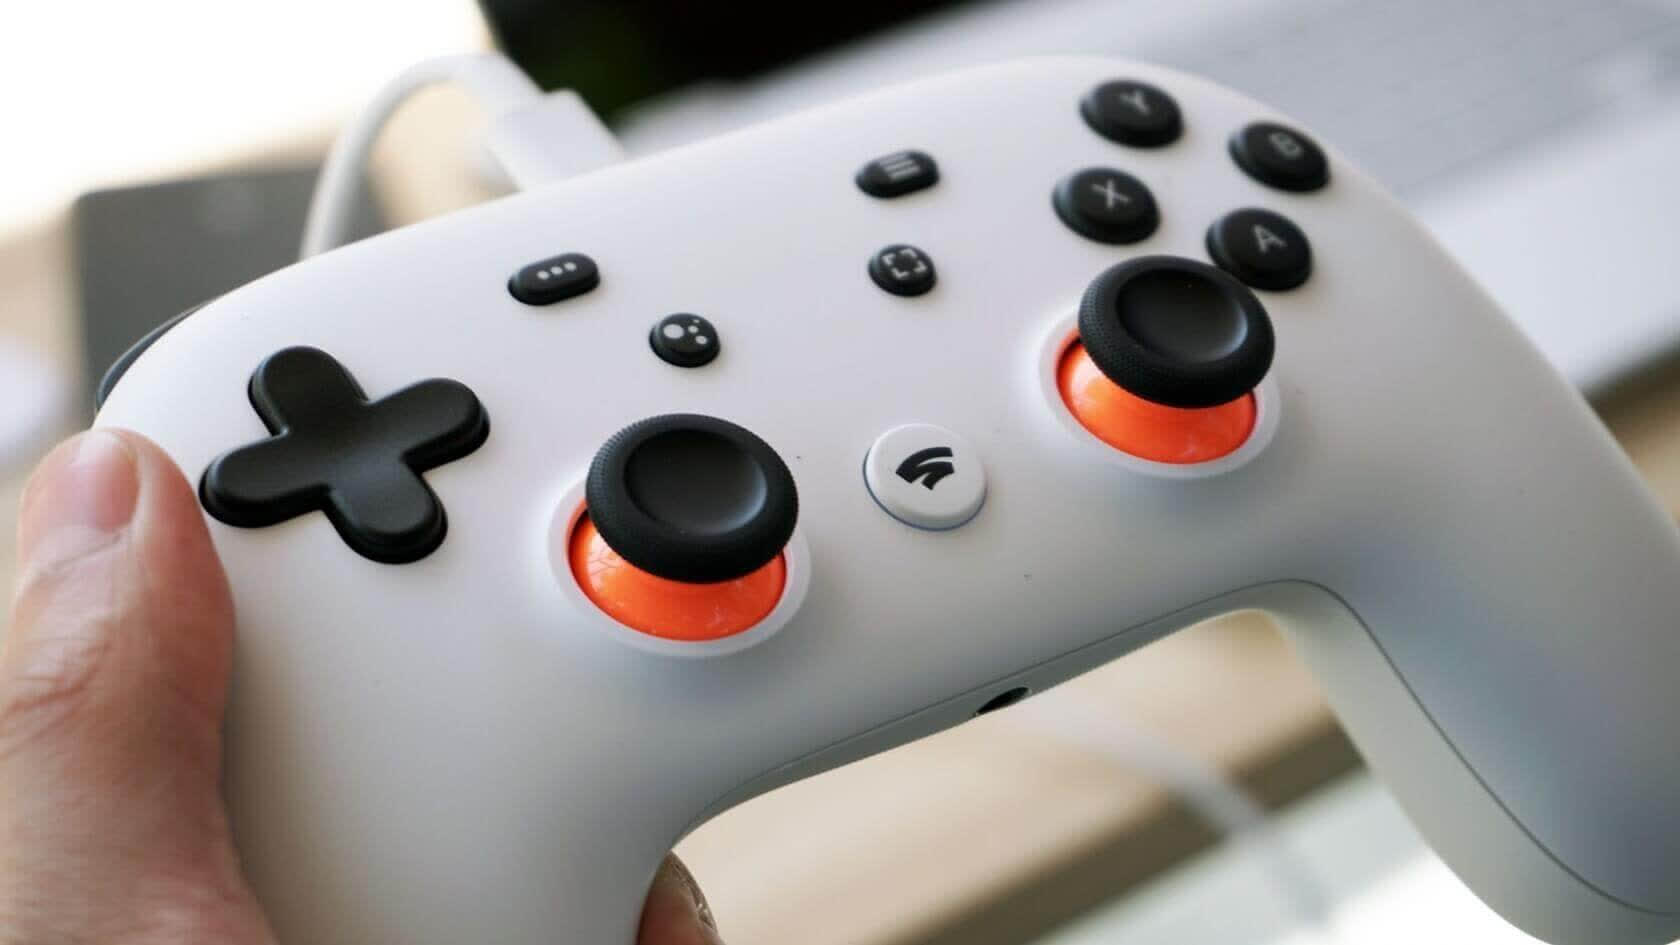 Google is now offering free limited-time trials for Stadia games